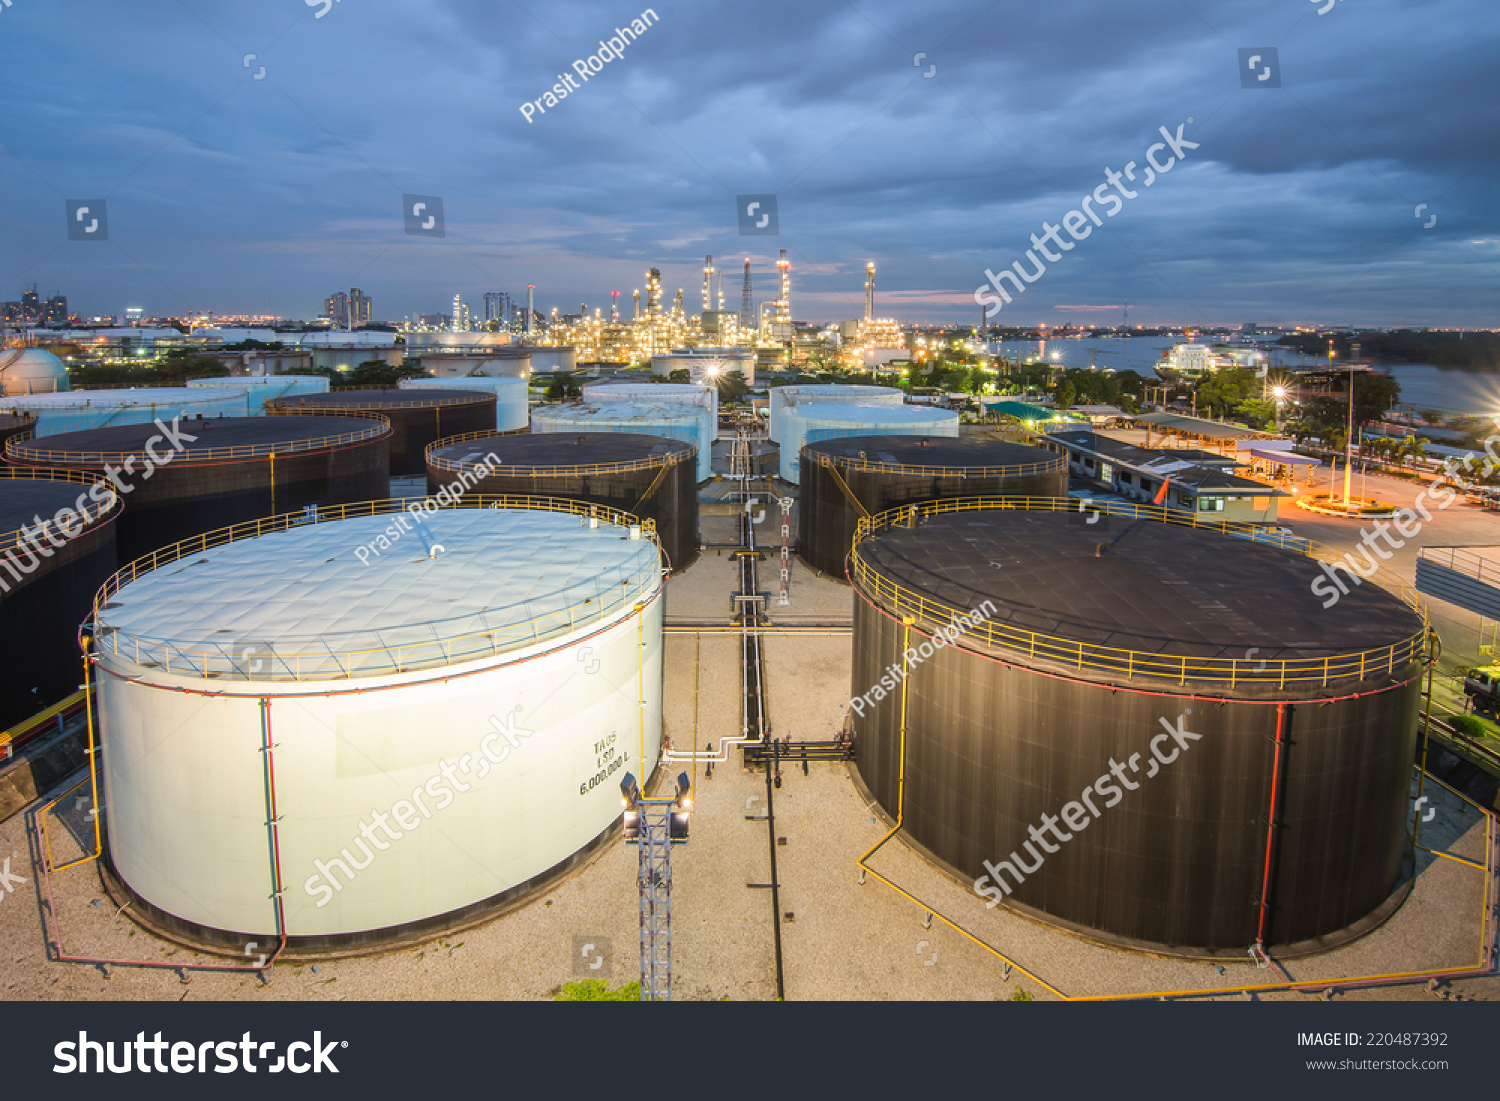 Landscape of oil refinery industry with oil storage tank #220487392